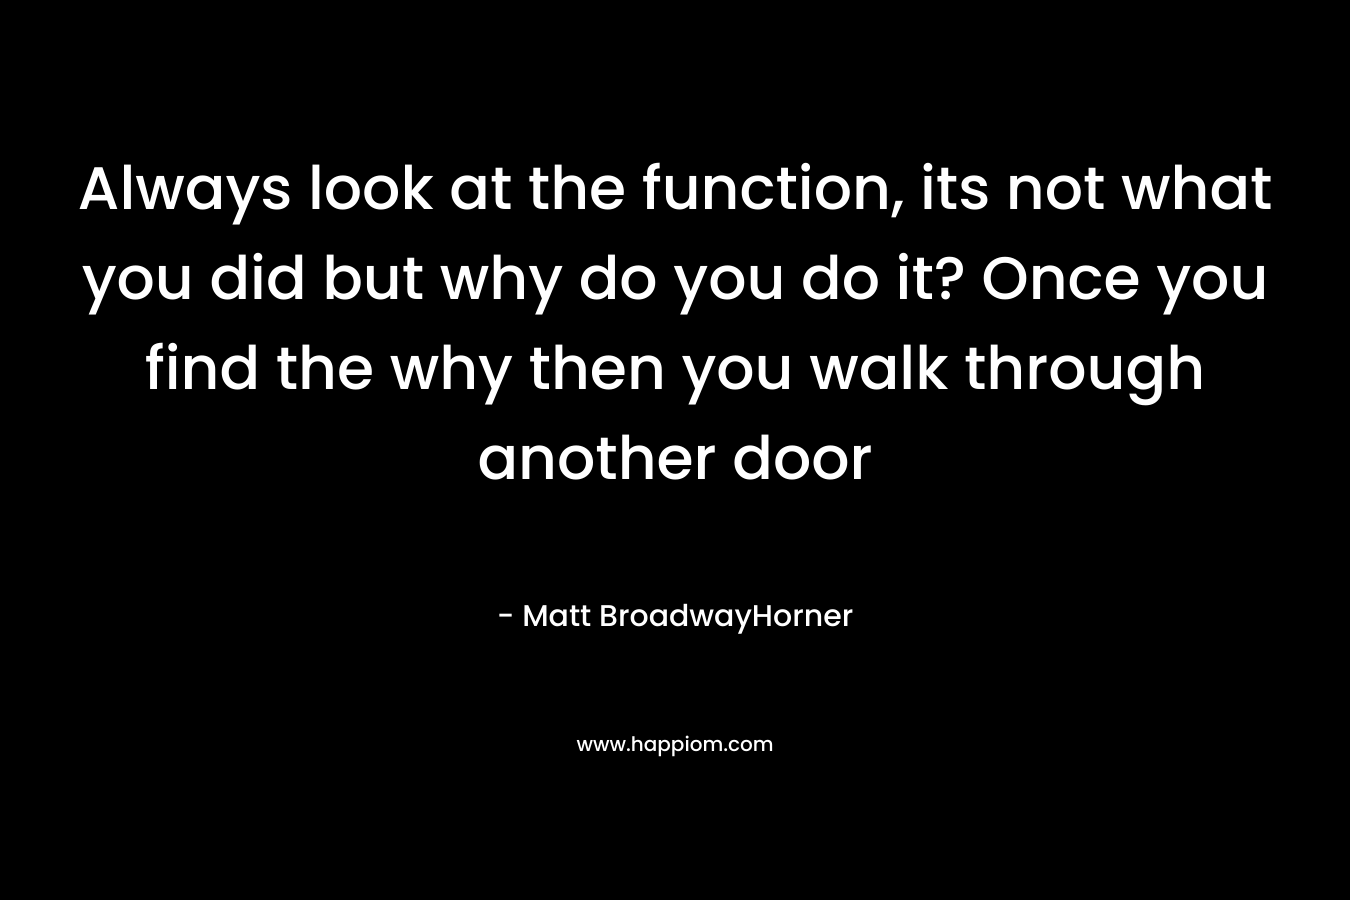 Always look at the function, its not what you did but why do you do it? Once you find the why then you walk through another door